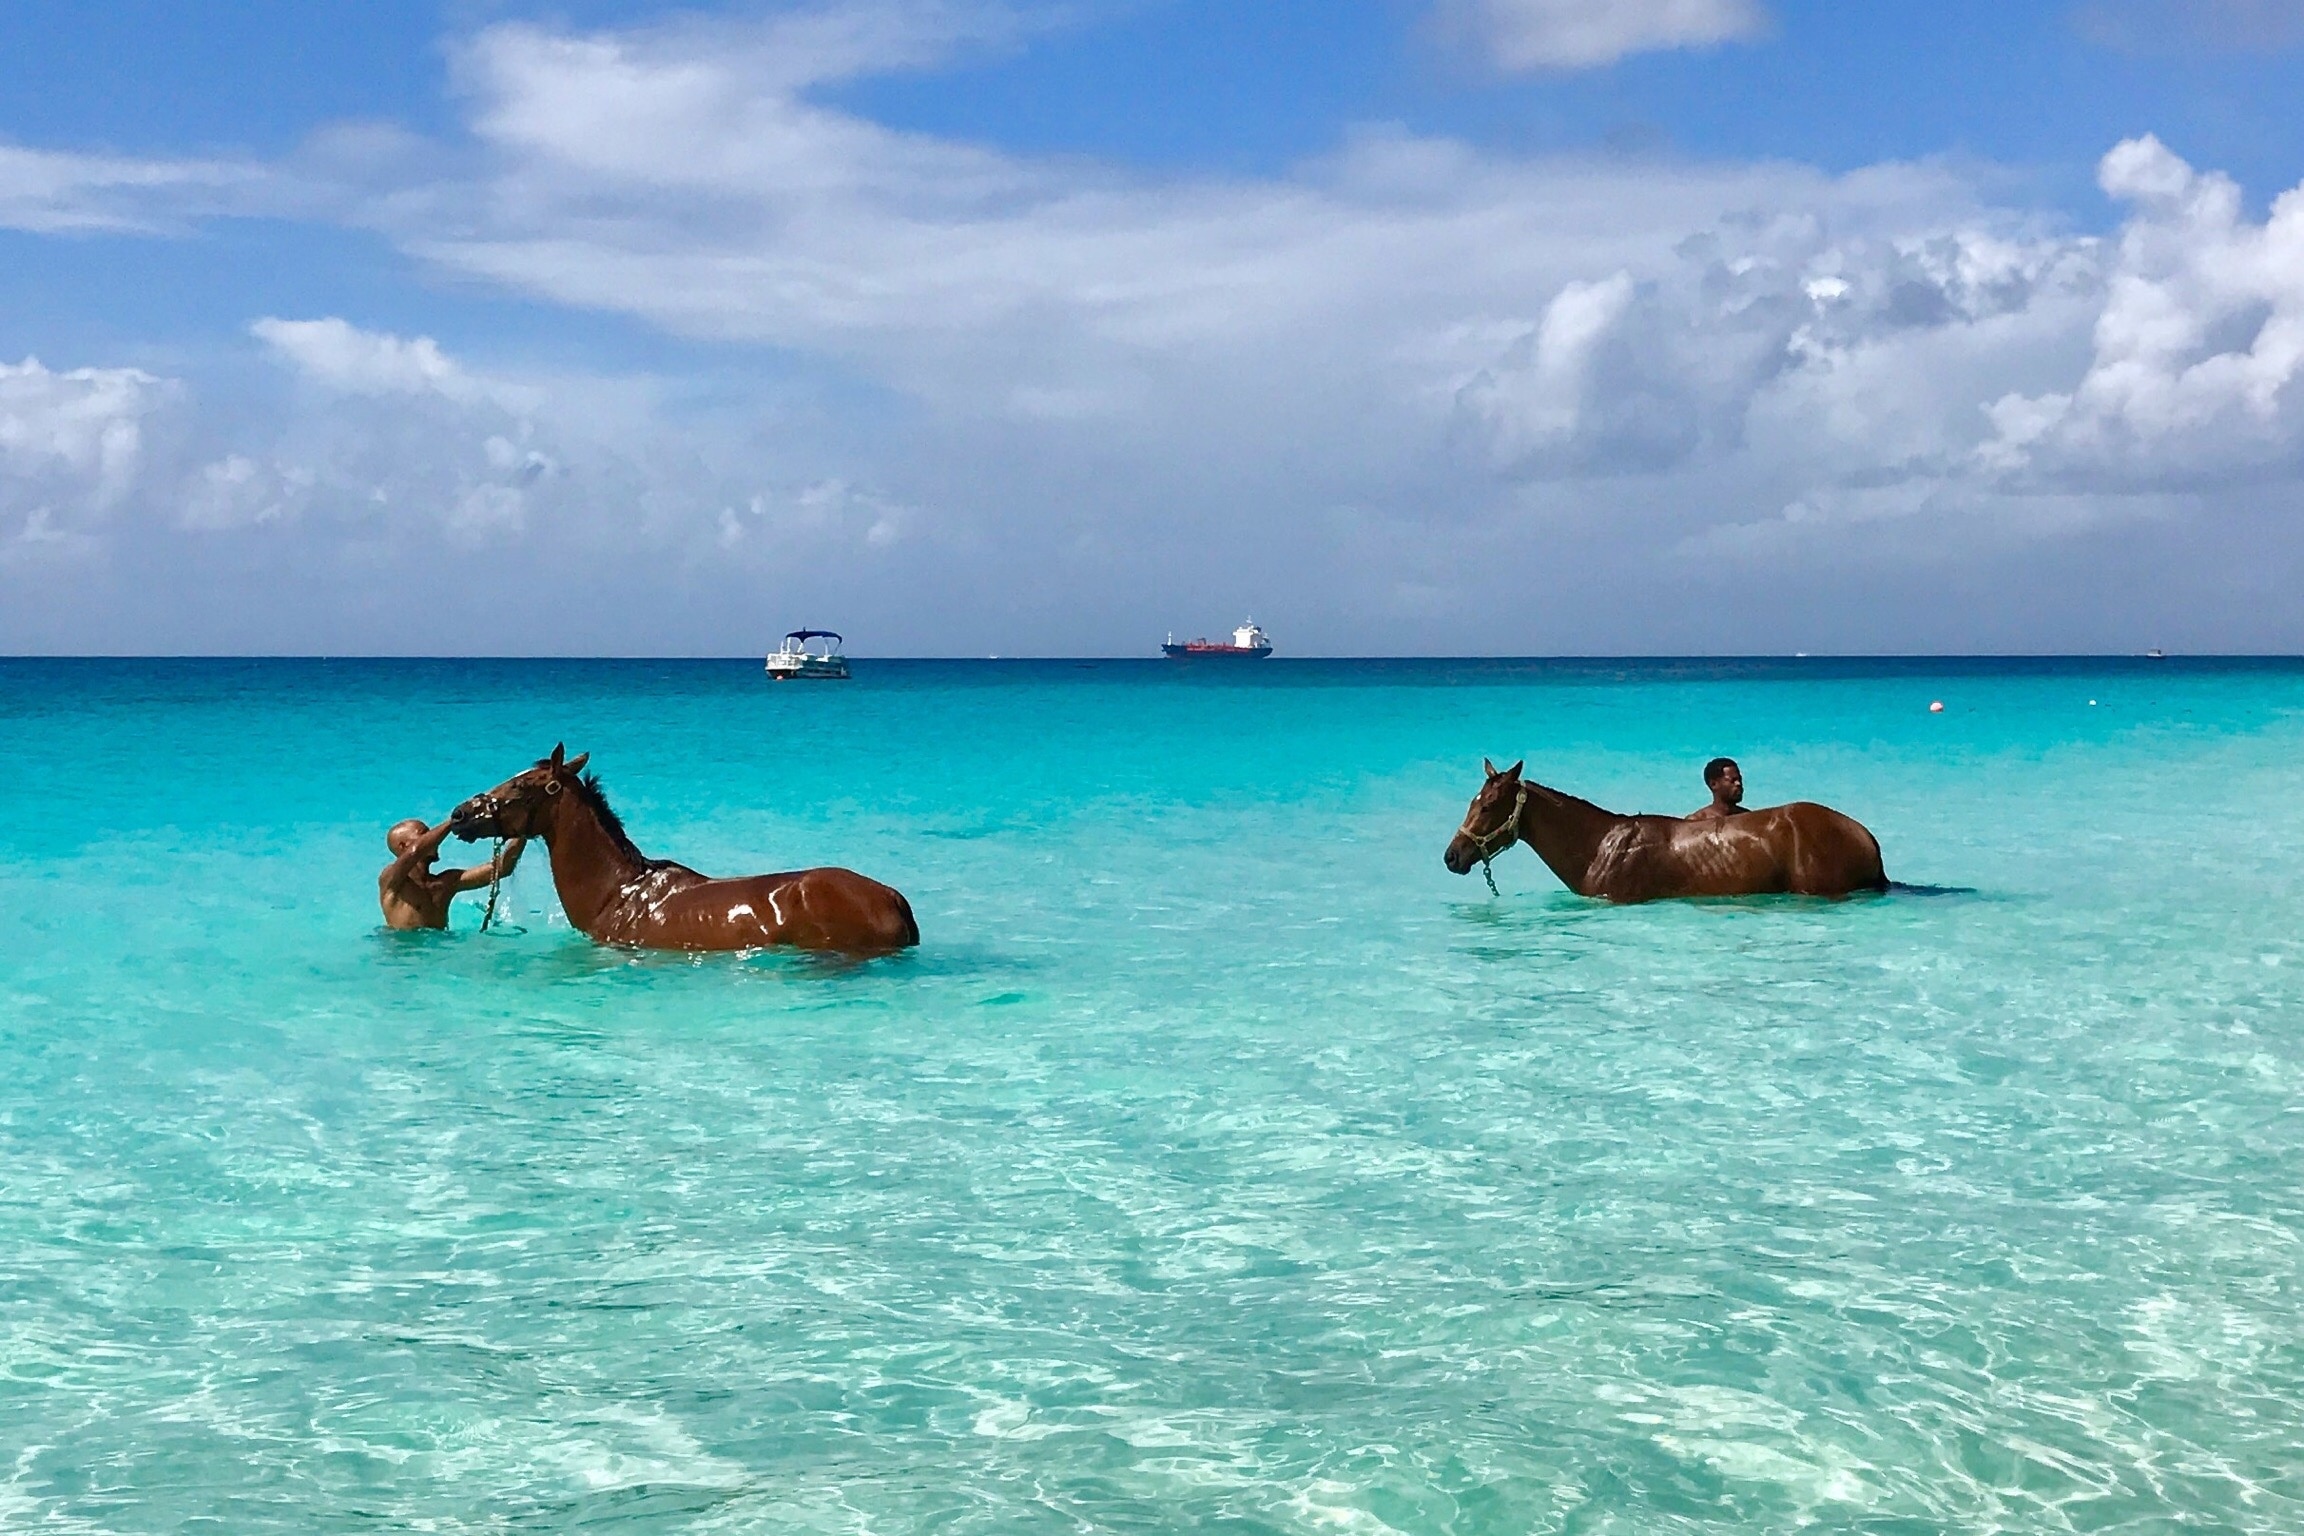 Even race horses need a spa day! 🇧🇧🐎 #BeachBound